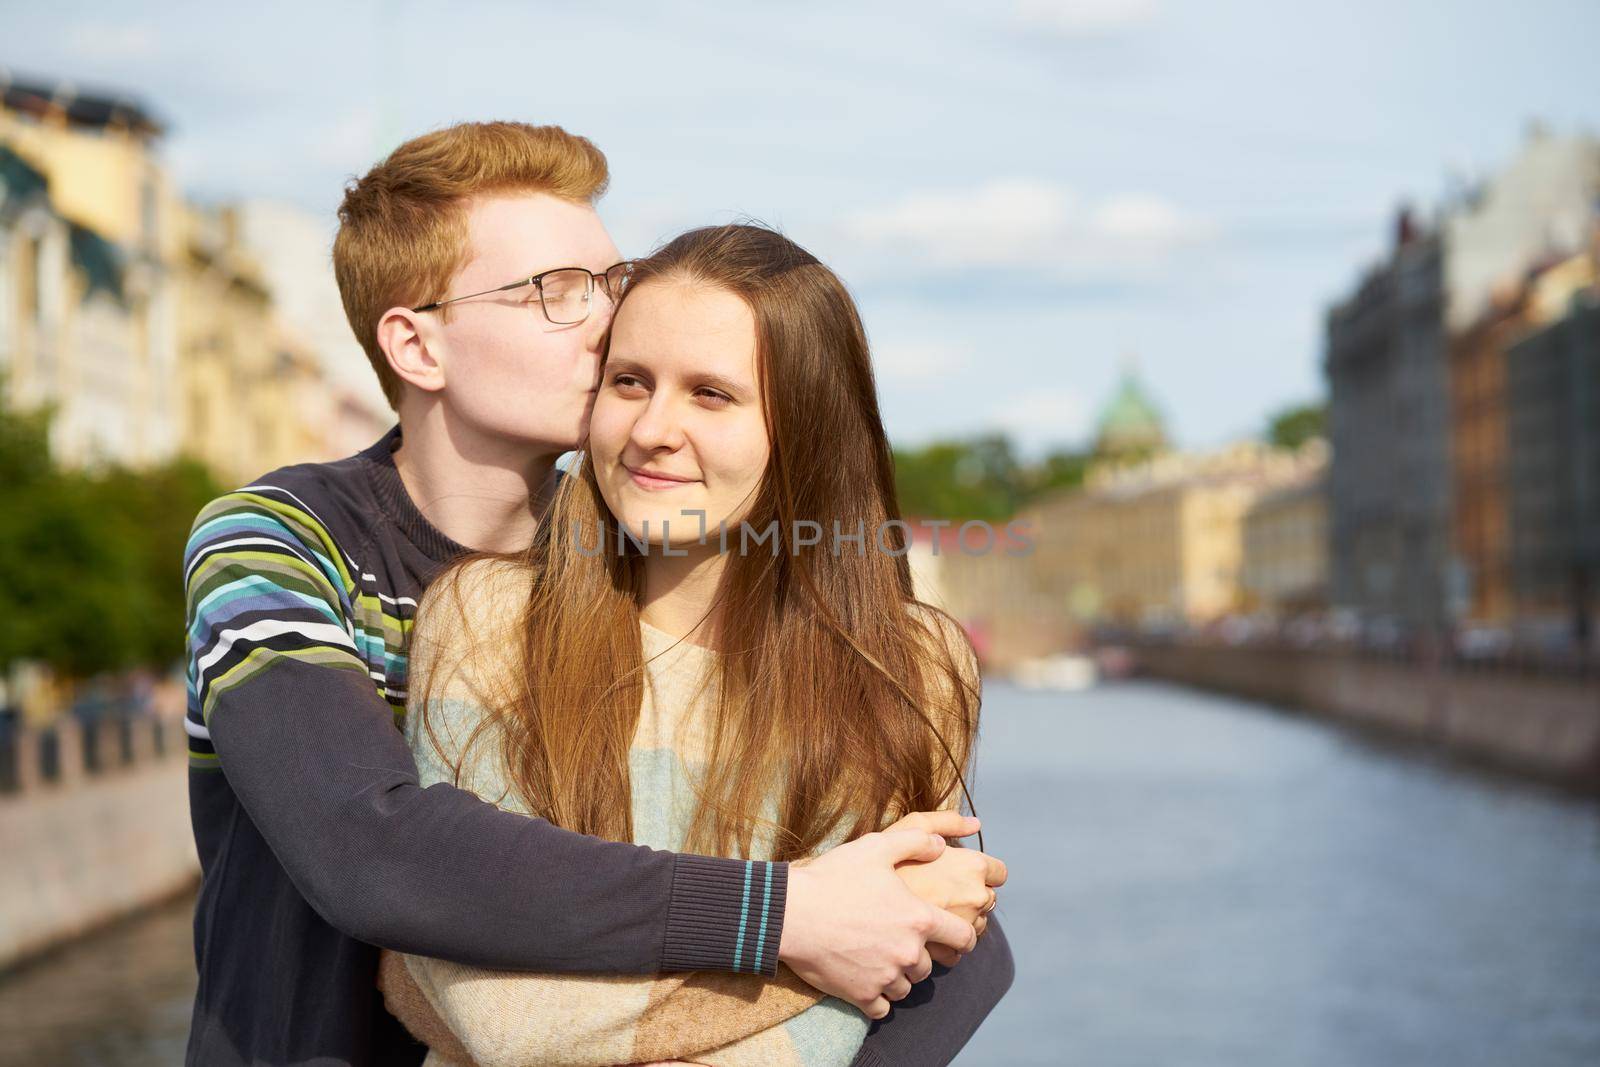 red-haired man kisses a woman on her hear, a boy in a sweater comforts a girl with long dark thick hair by NataBene